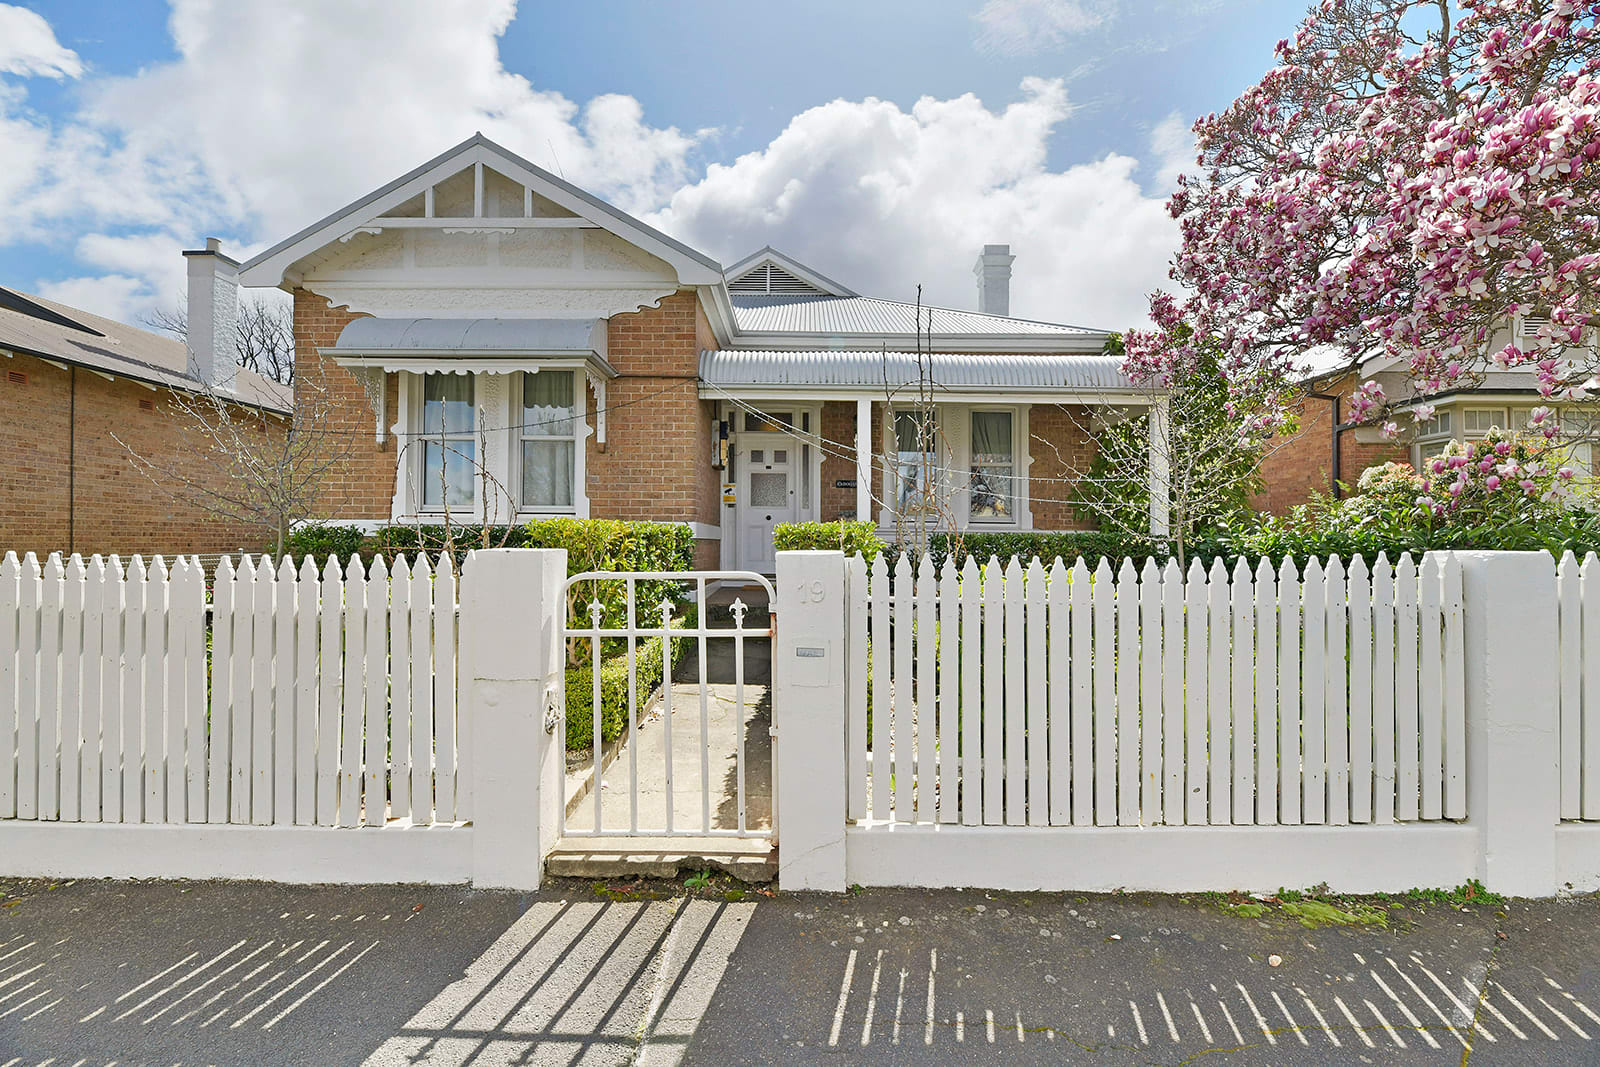 Property Image 2 - Exquisite Heritage Home in Orange with Stunning Garden